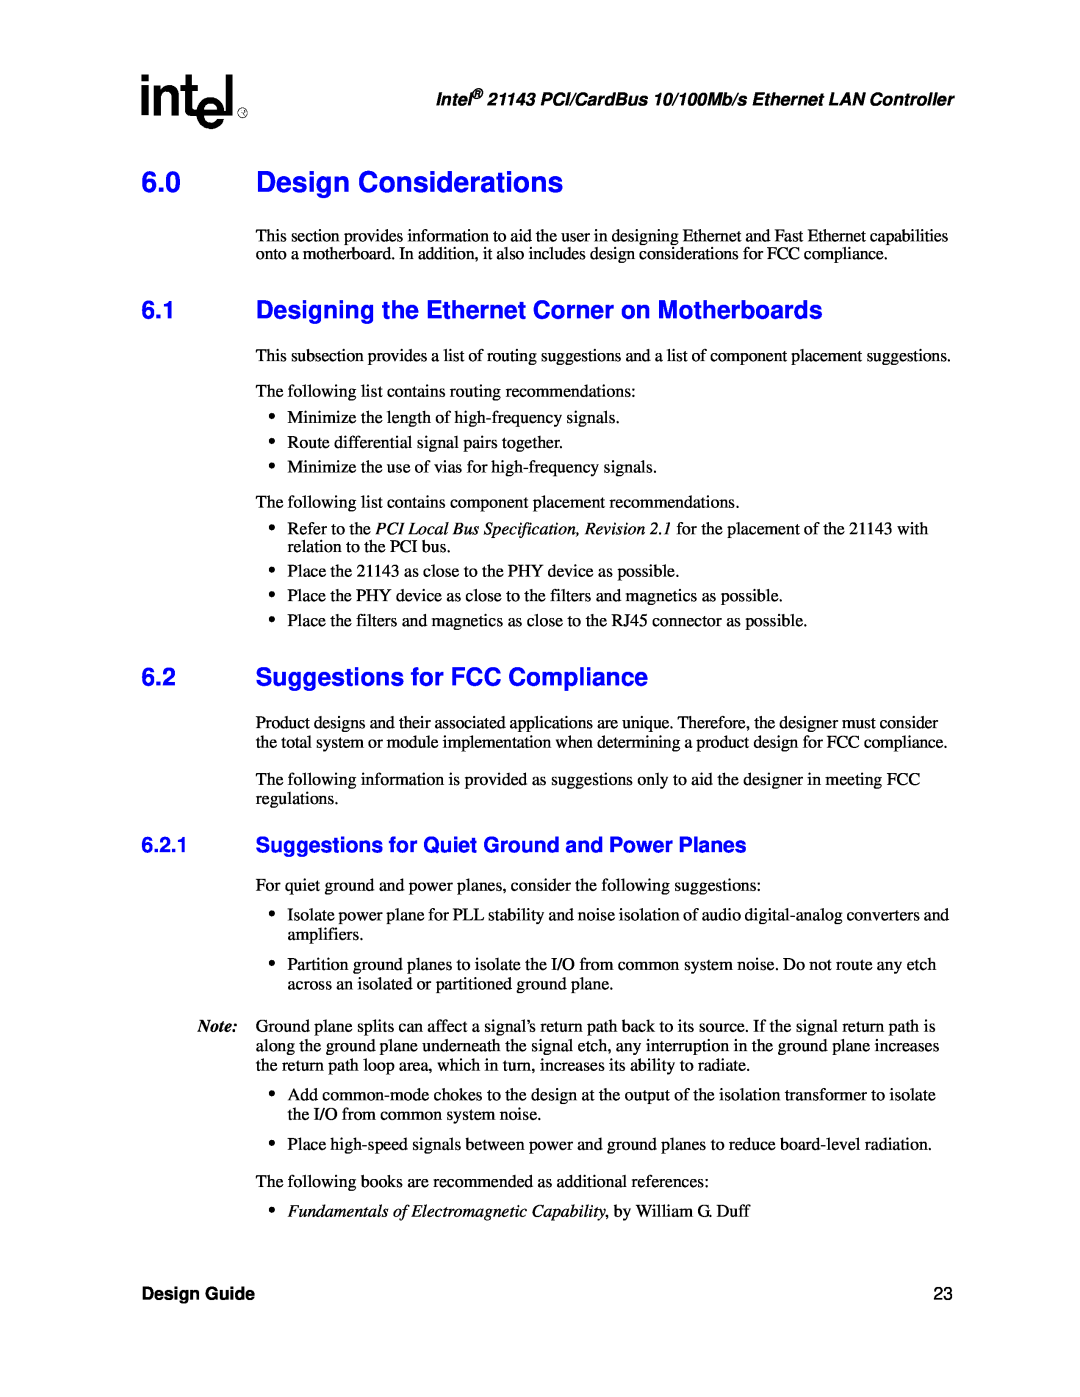 Intel 21143 manual Design Considerations, Designing the Ethernet Corner on Motherboards, Suggestions for FCC Compliance 